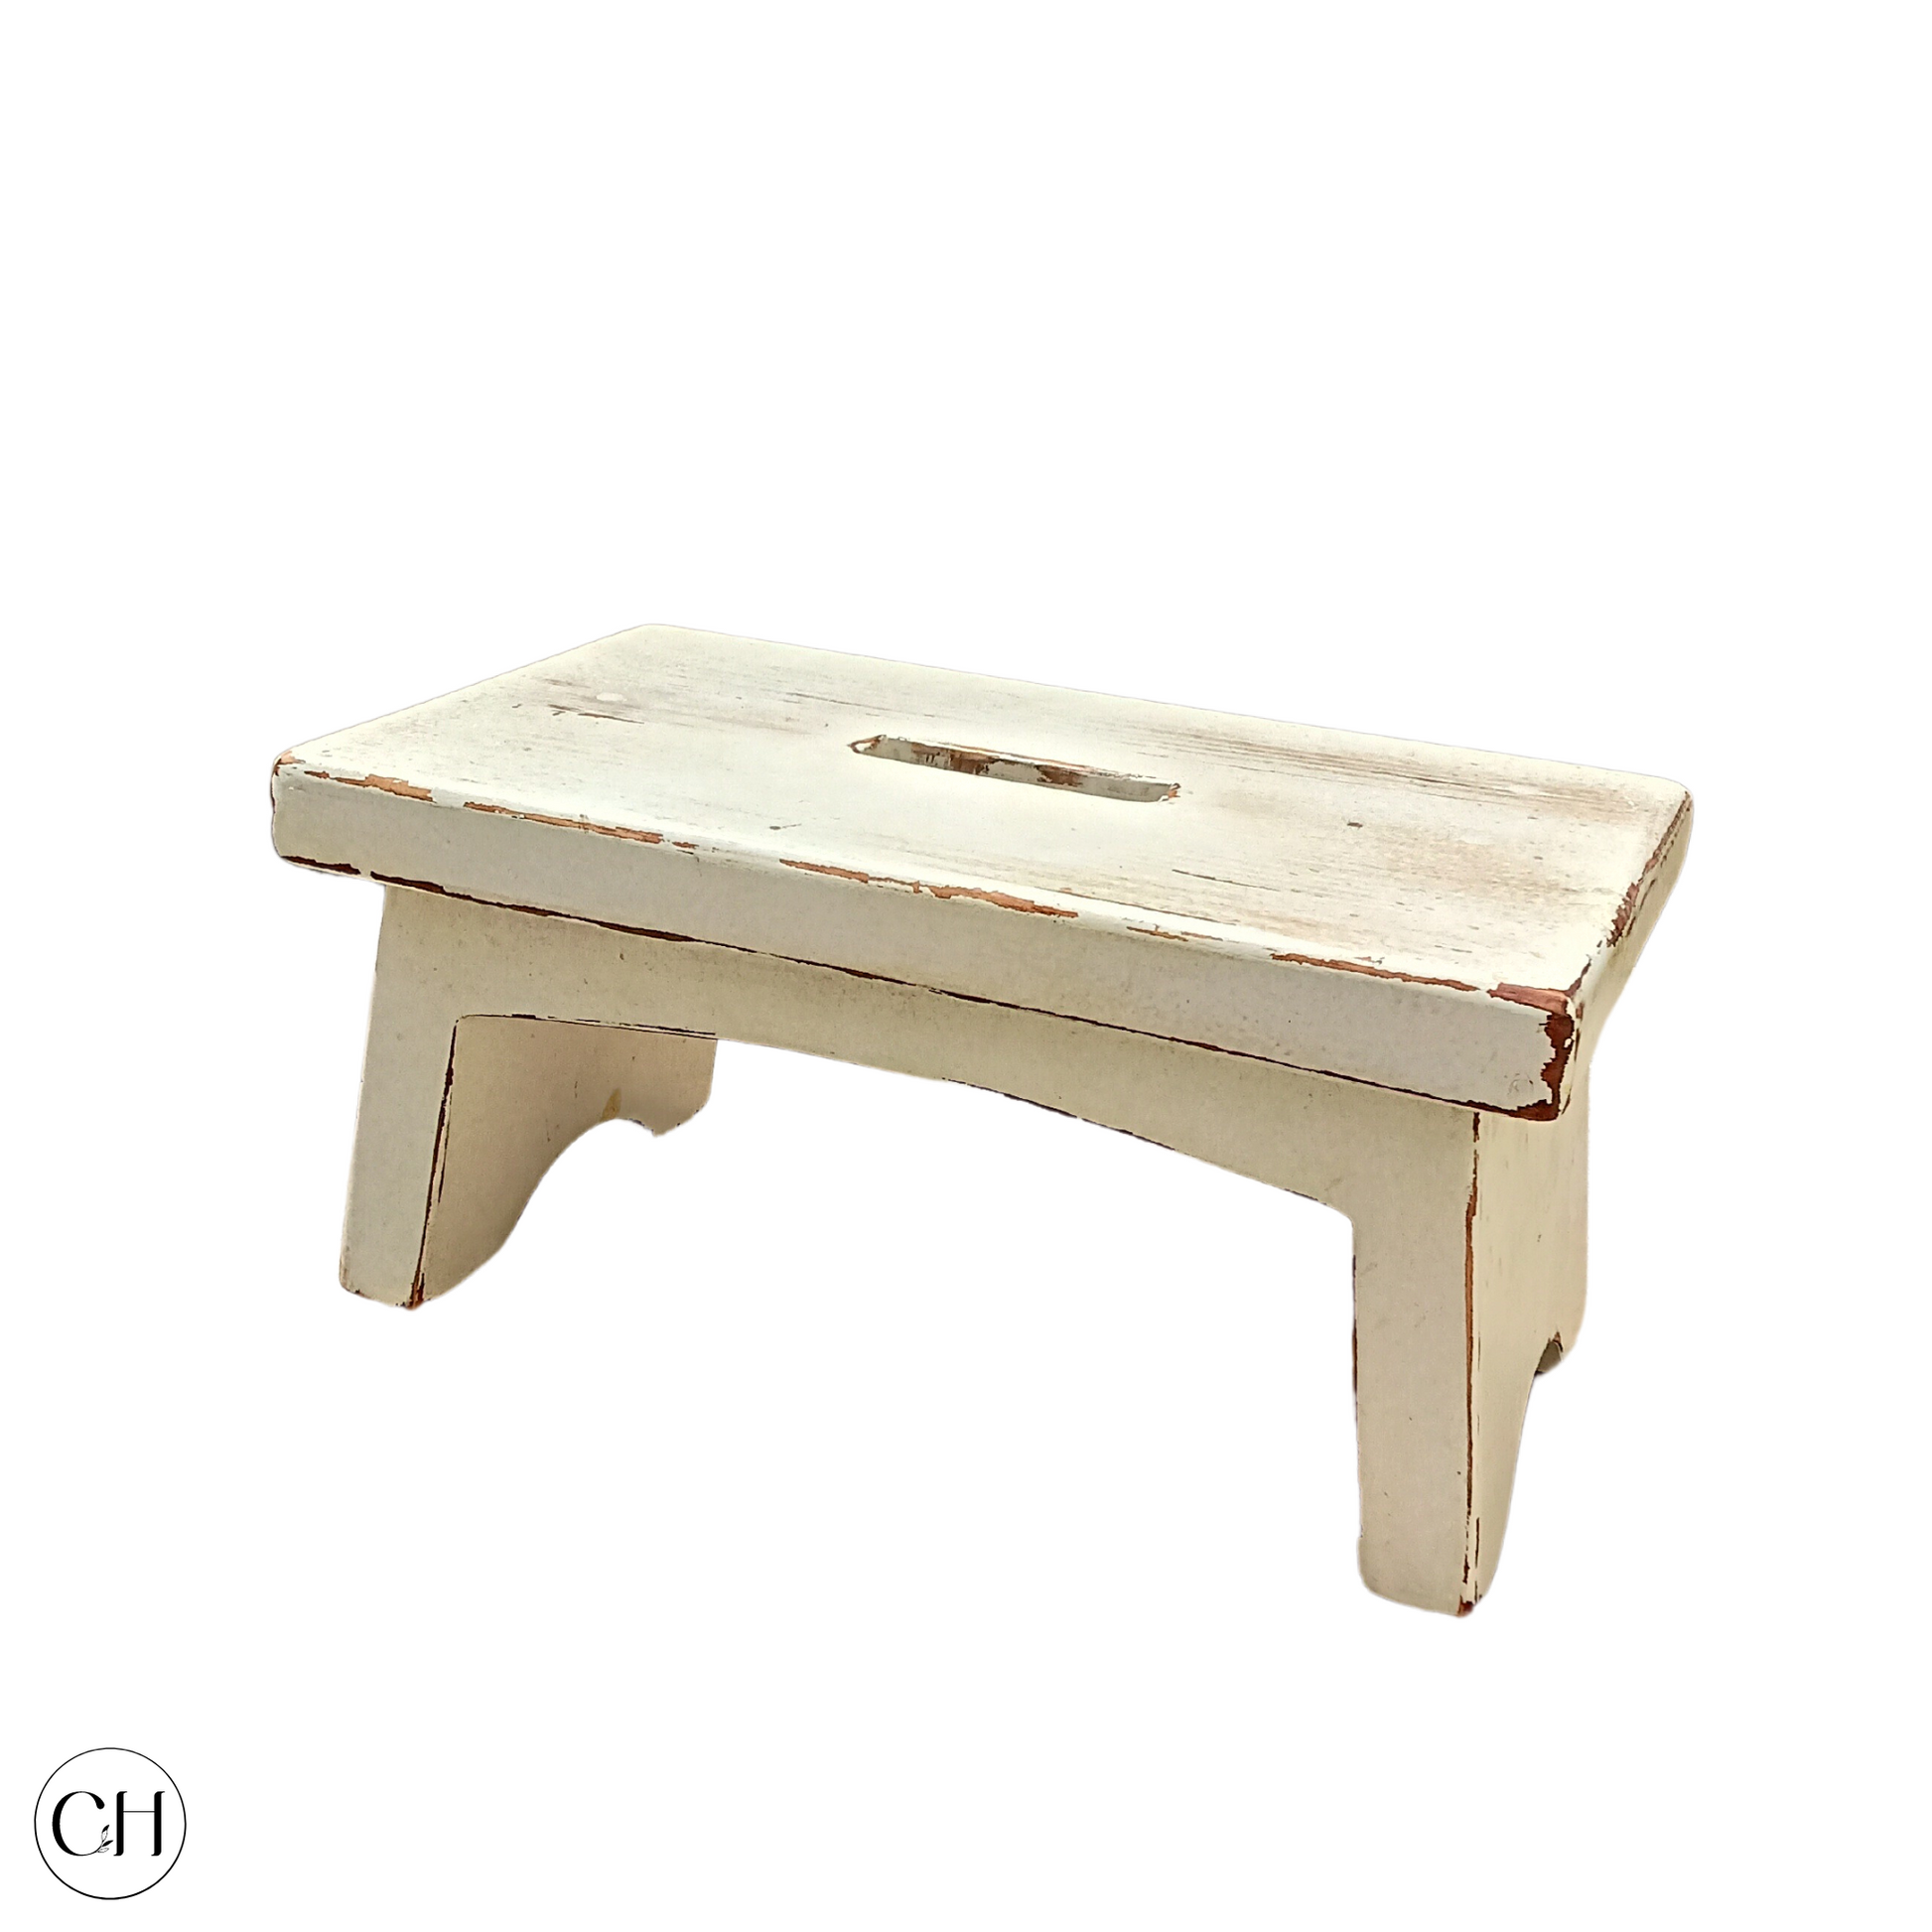 CustHum- Step - small wooden stool with groove in the middle for easy carrying (distressed white, white background)